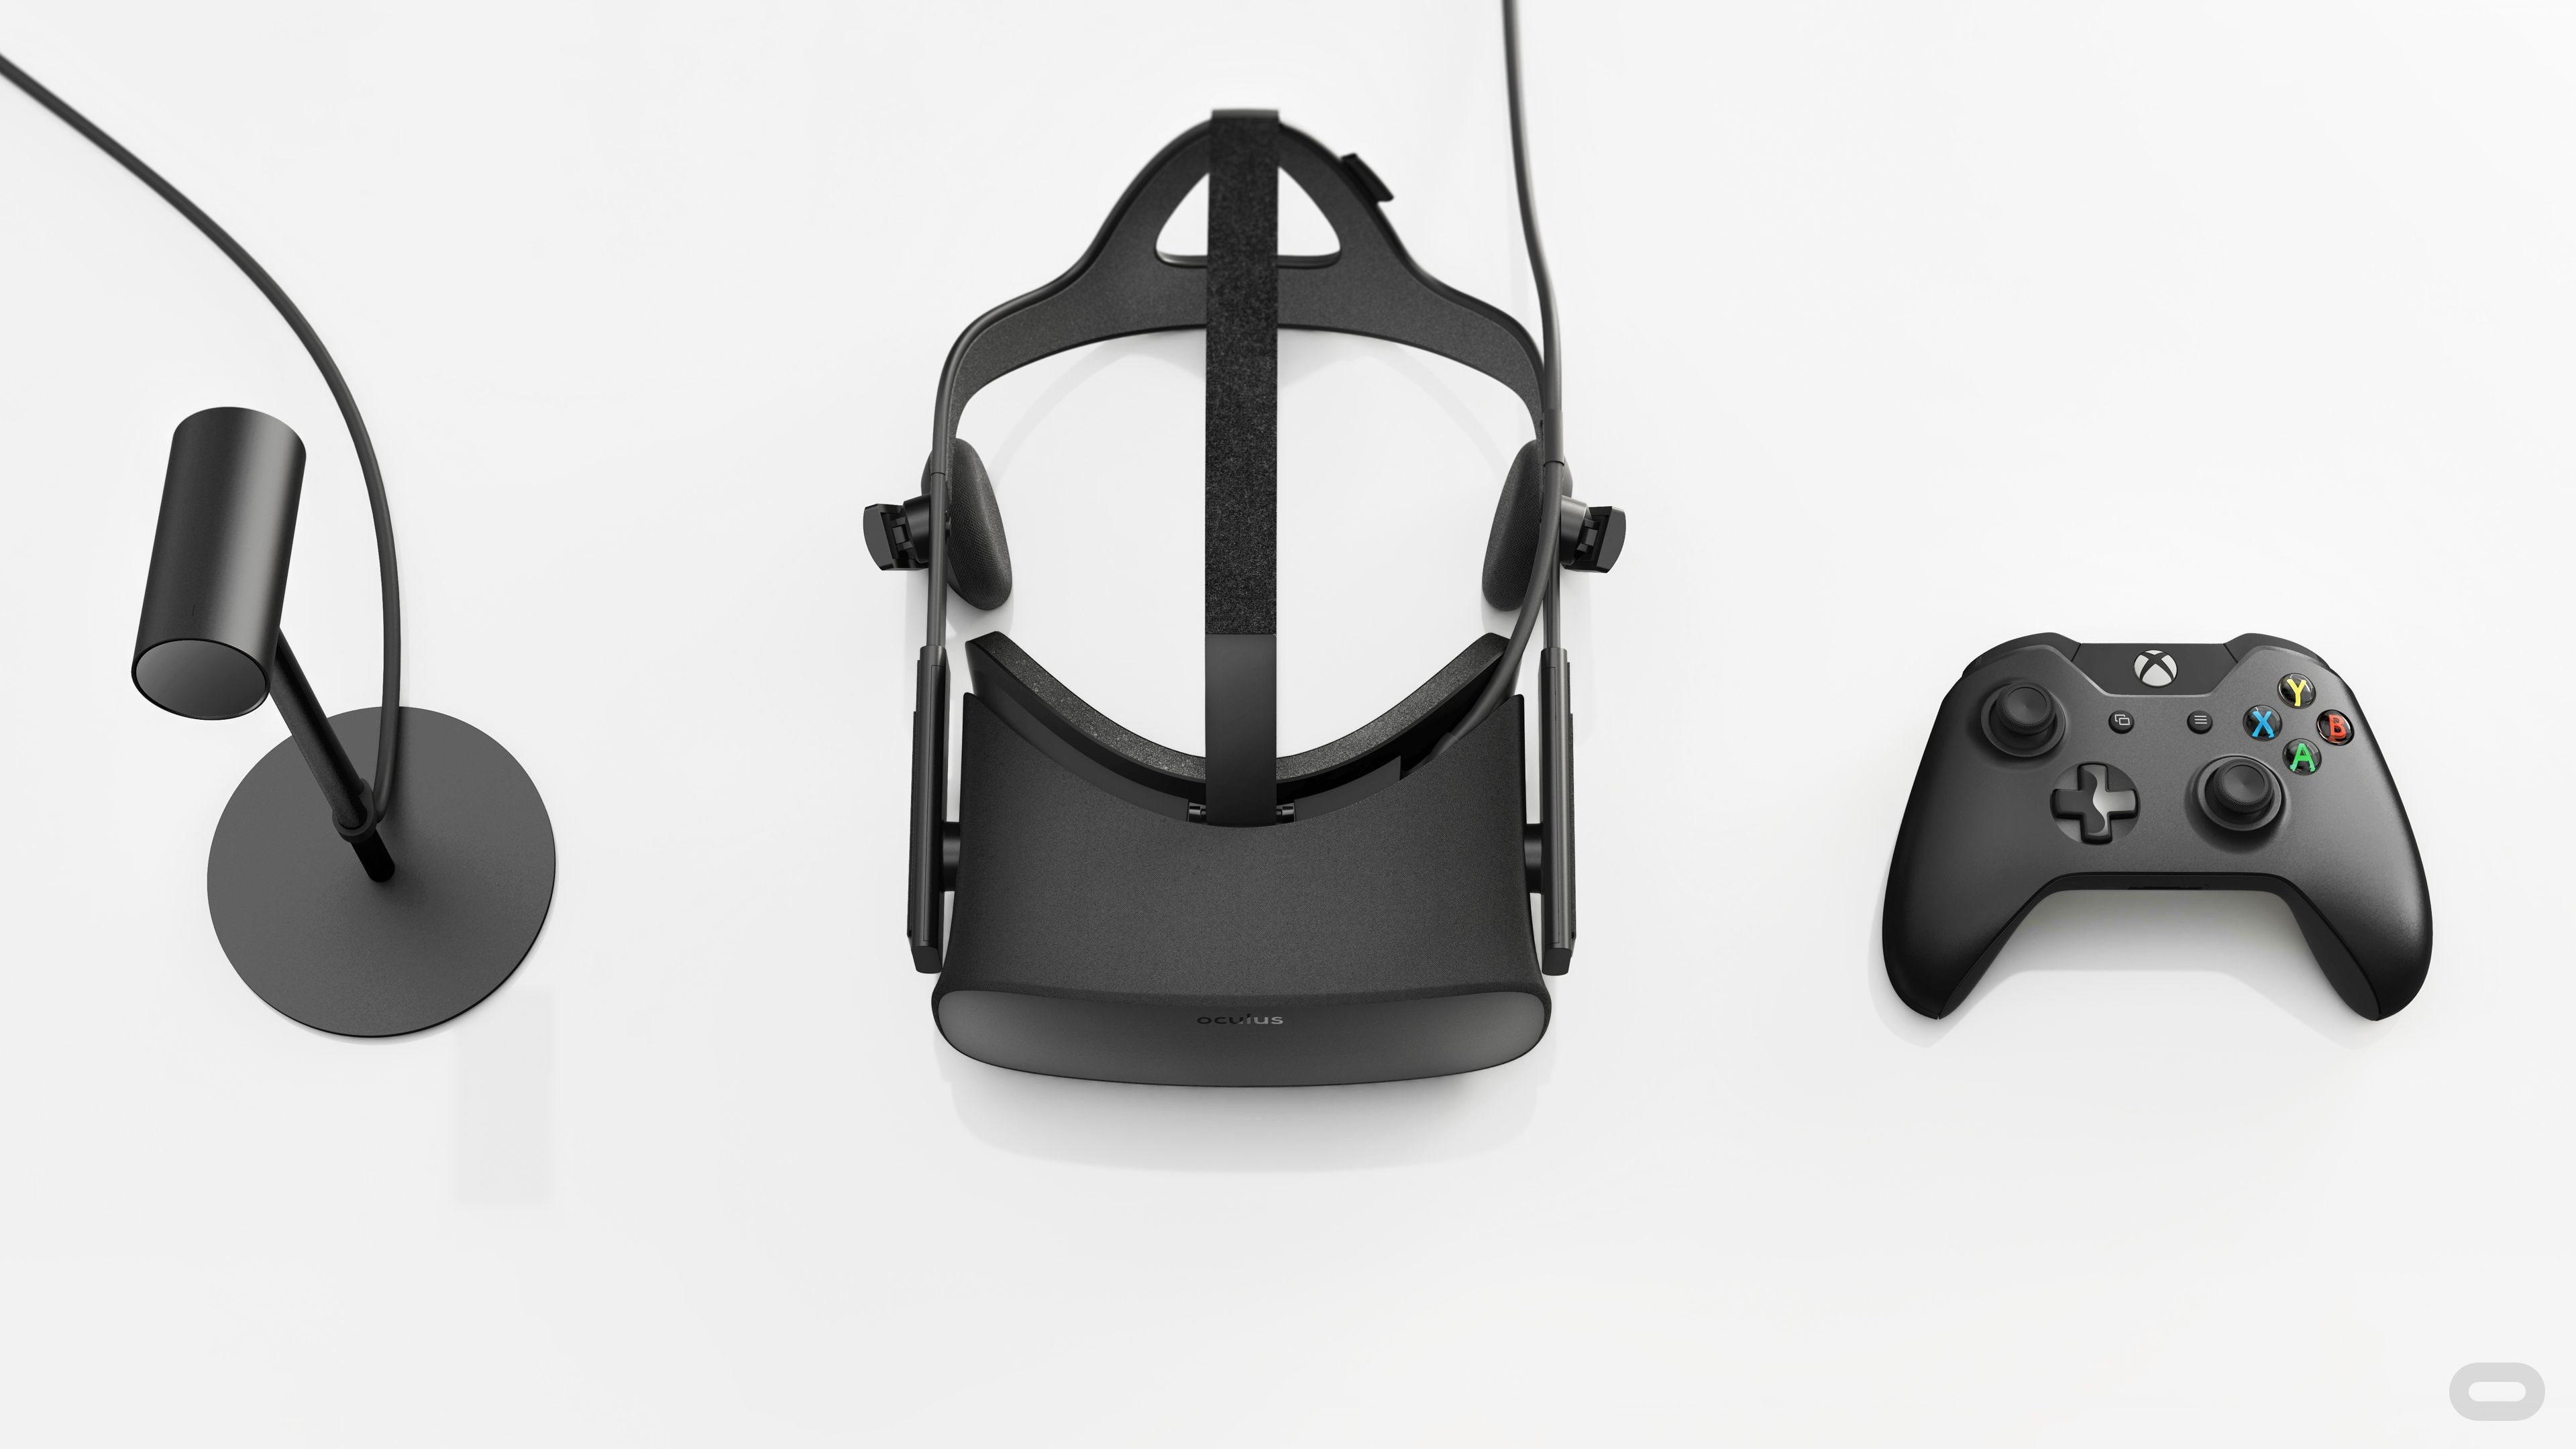 VR headset, Virtual Reality, Oculus Touch, Oculus Rift